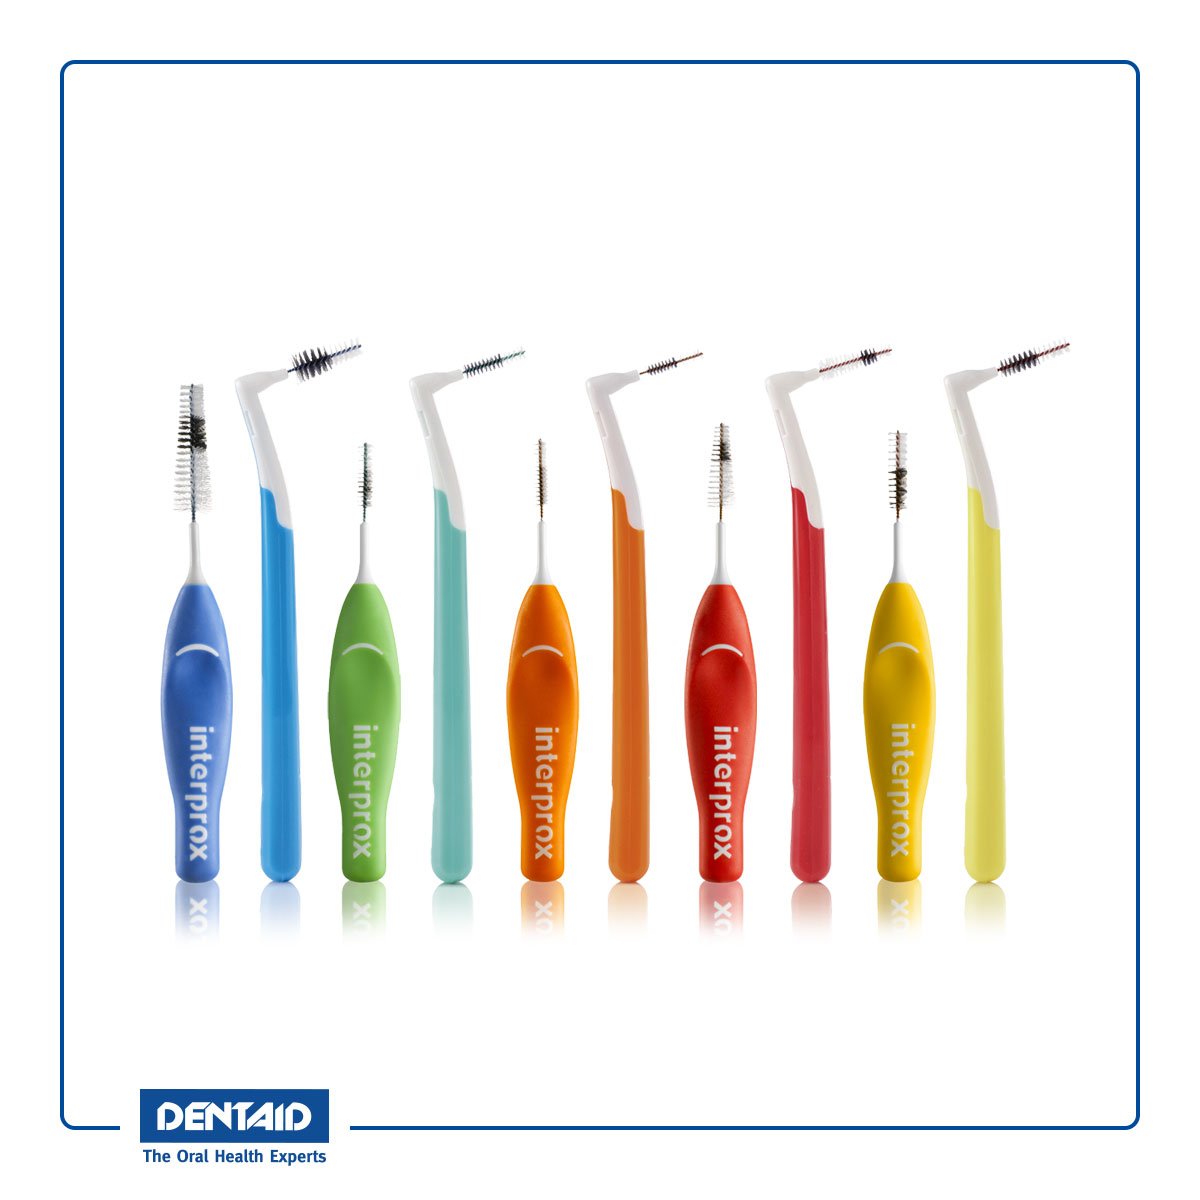 Variant weerstand Cilia DENTAID Oral Health Experts on Twitter: "#Interprox offers a wide range of  interproximal brushes designed to remove #OralBiofilm from interdental  spaces. https://t.co/mUnXumpjCQ" / Twitter